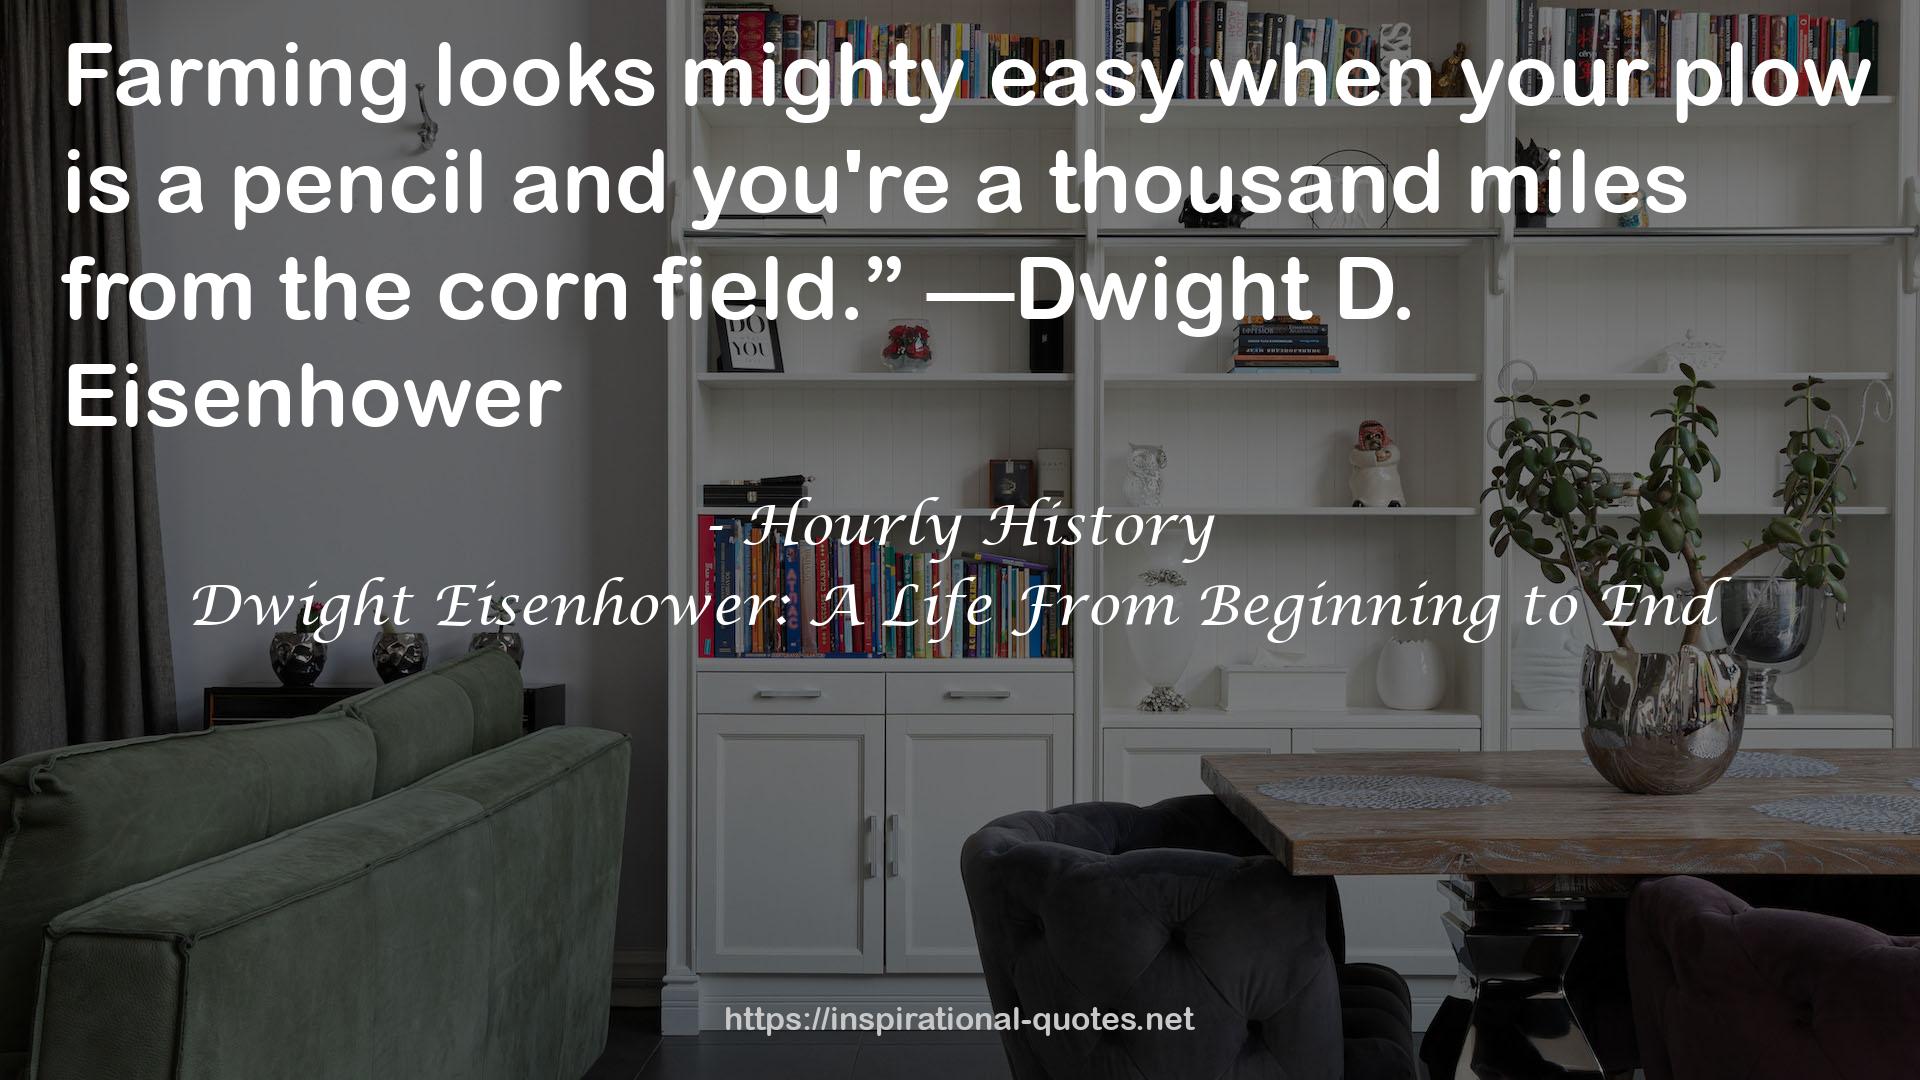 Dwight Eisenhower: A Life From Beginning to End QUOTES